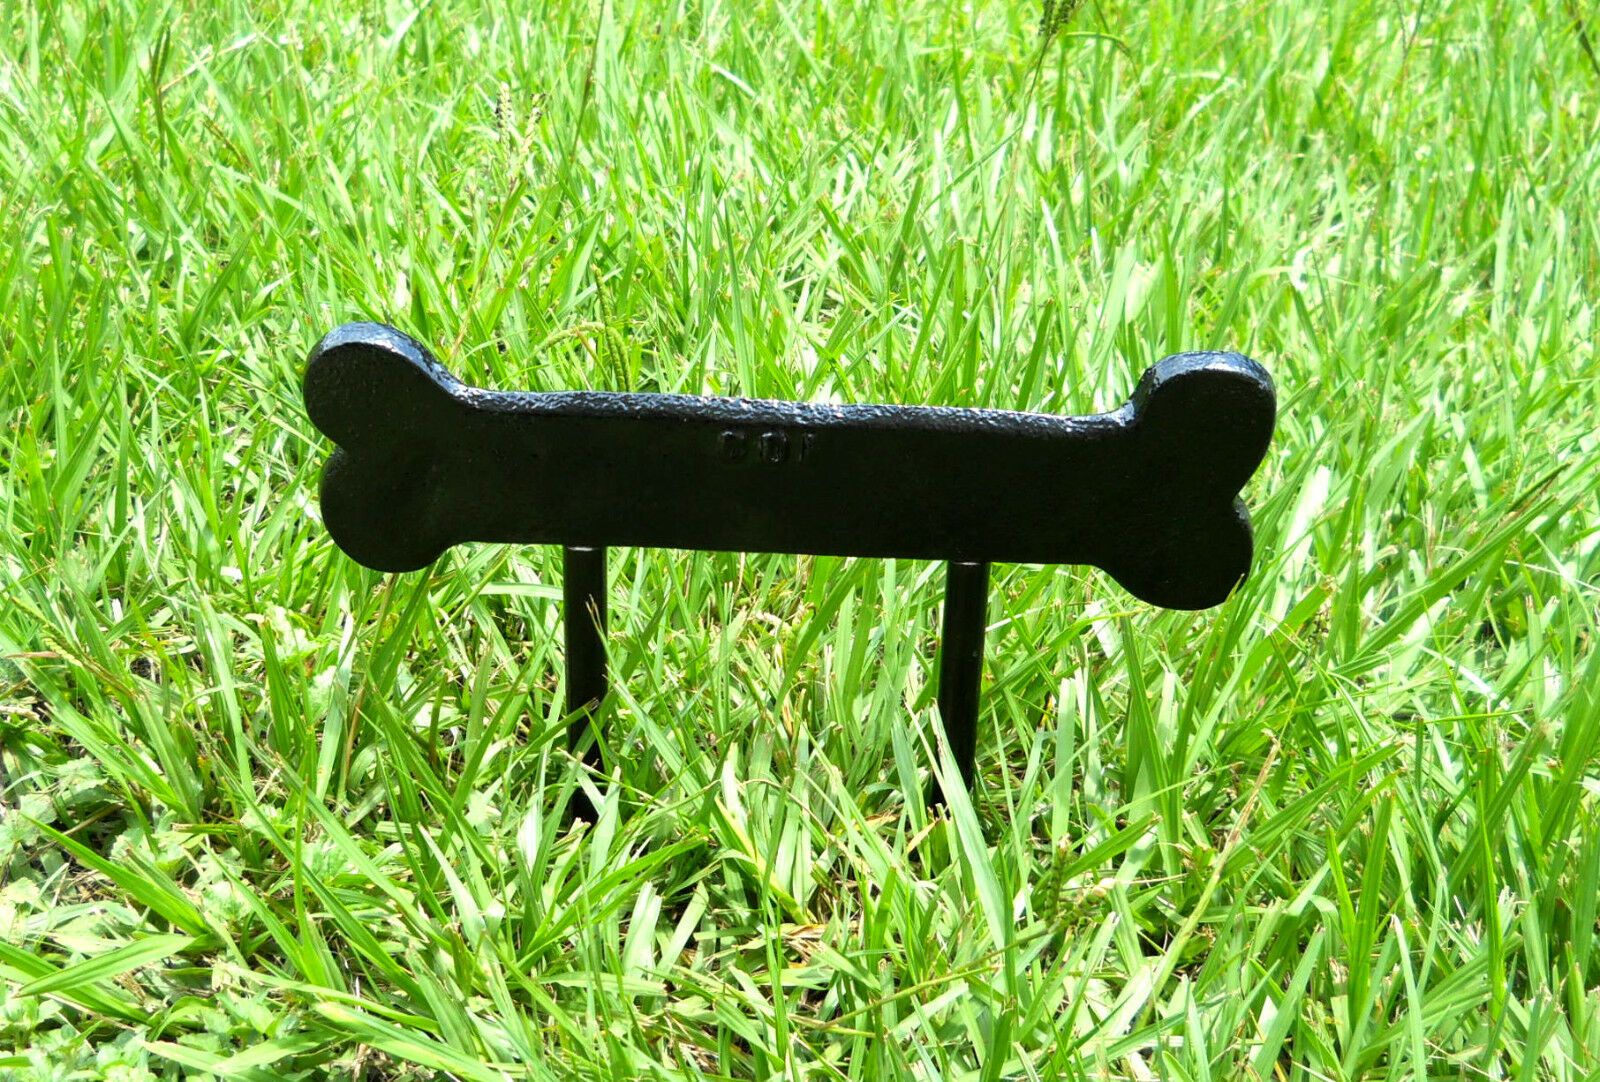 Dog Bone Cast Iron Boot Scraper Vintage Style for the Yard or Sidewalk Cast Iron Carvers Olde Iron 